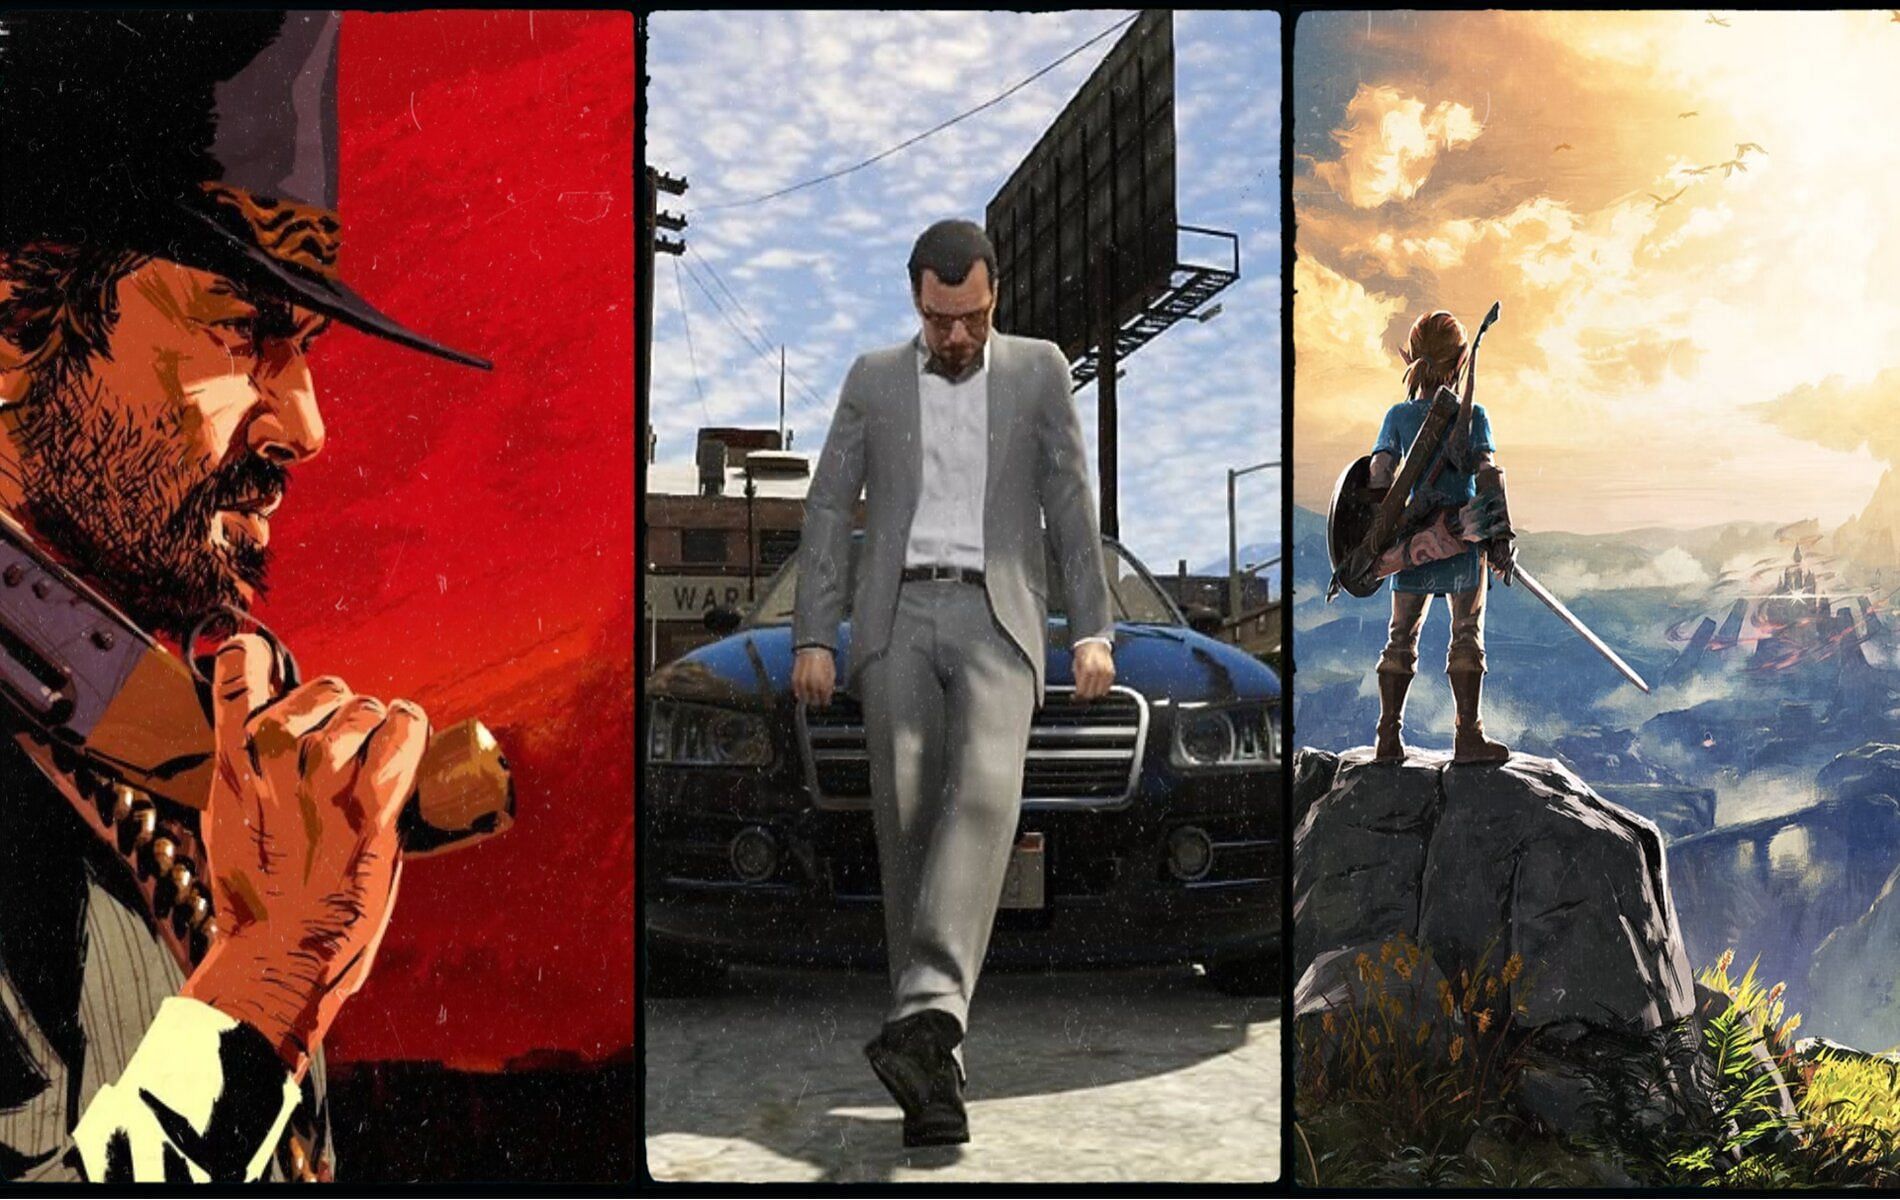 GTA V is joint highest-rated game ever on Metacritic